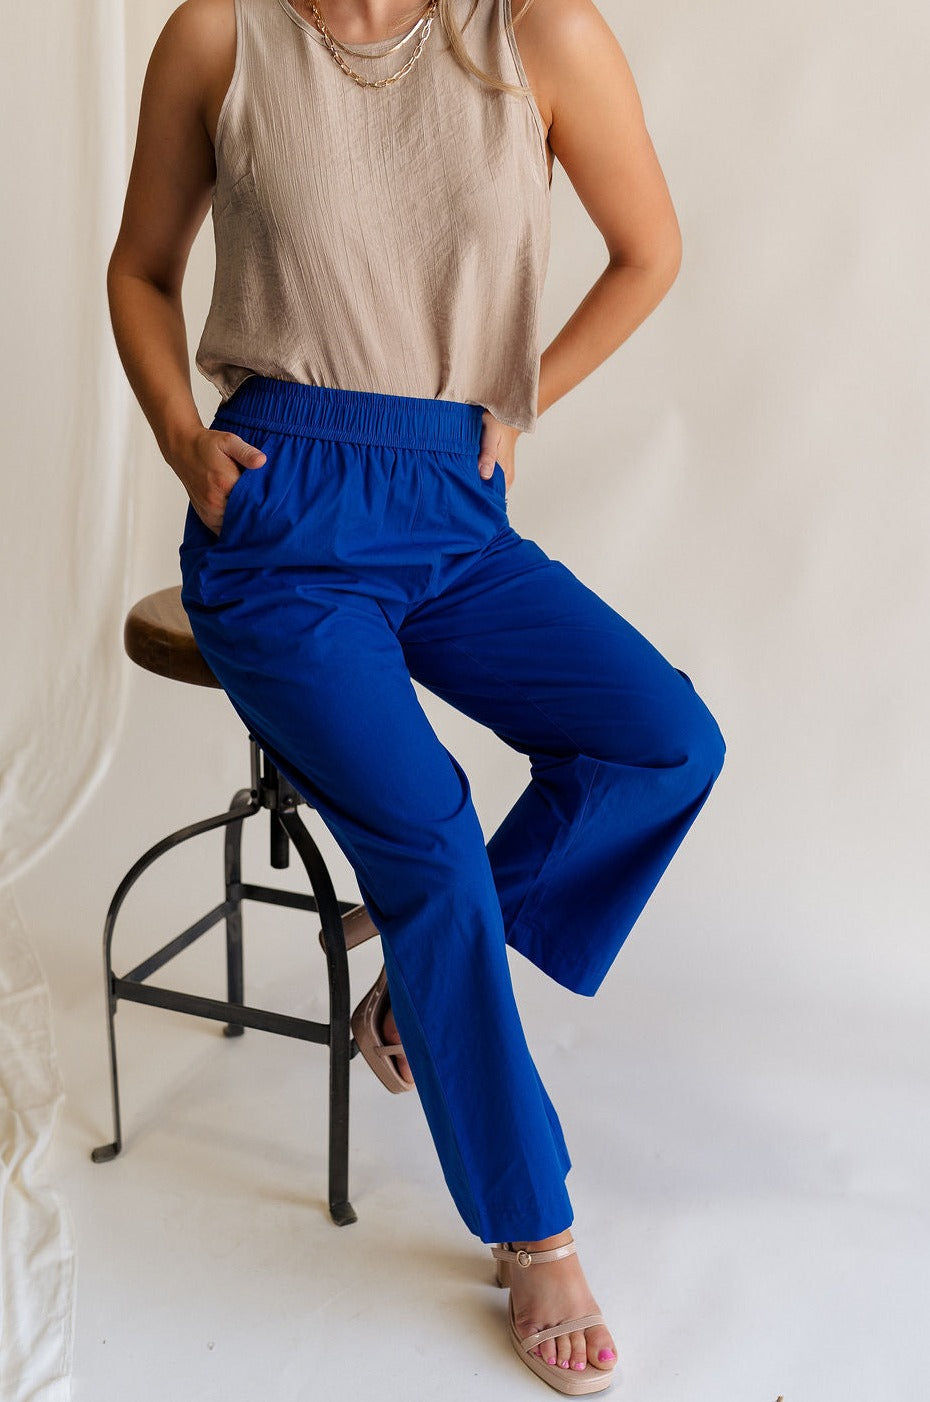 Front view of female model wearing the Freya Cobalt Blue Straight Leg Pants which features Cobalt Blue Cotton Fabric, Wide Pant Legs, Elastic Waistband and Two Side Pockets